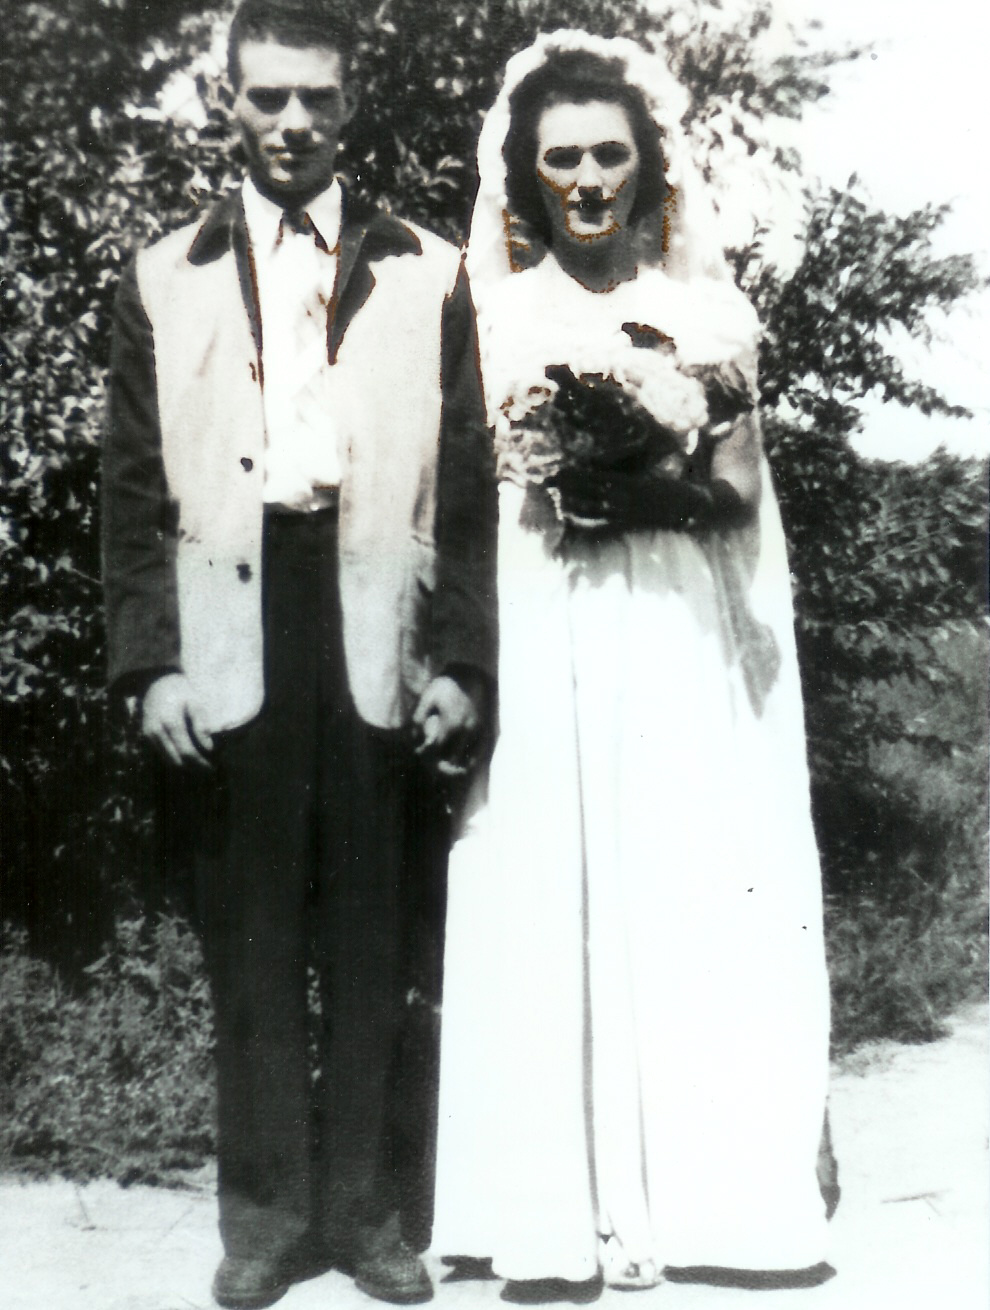 Alvin "Bud" and Alvina Springer on their wedding day, 75 years ago